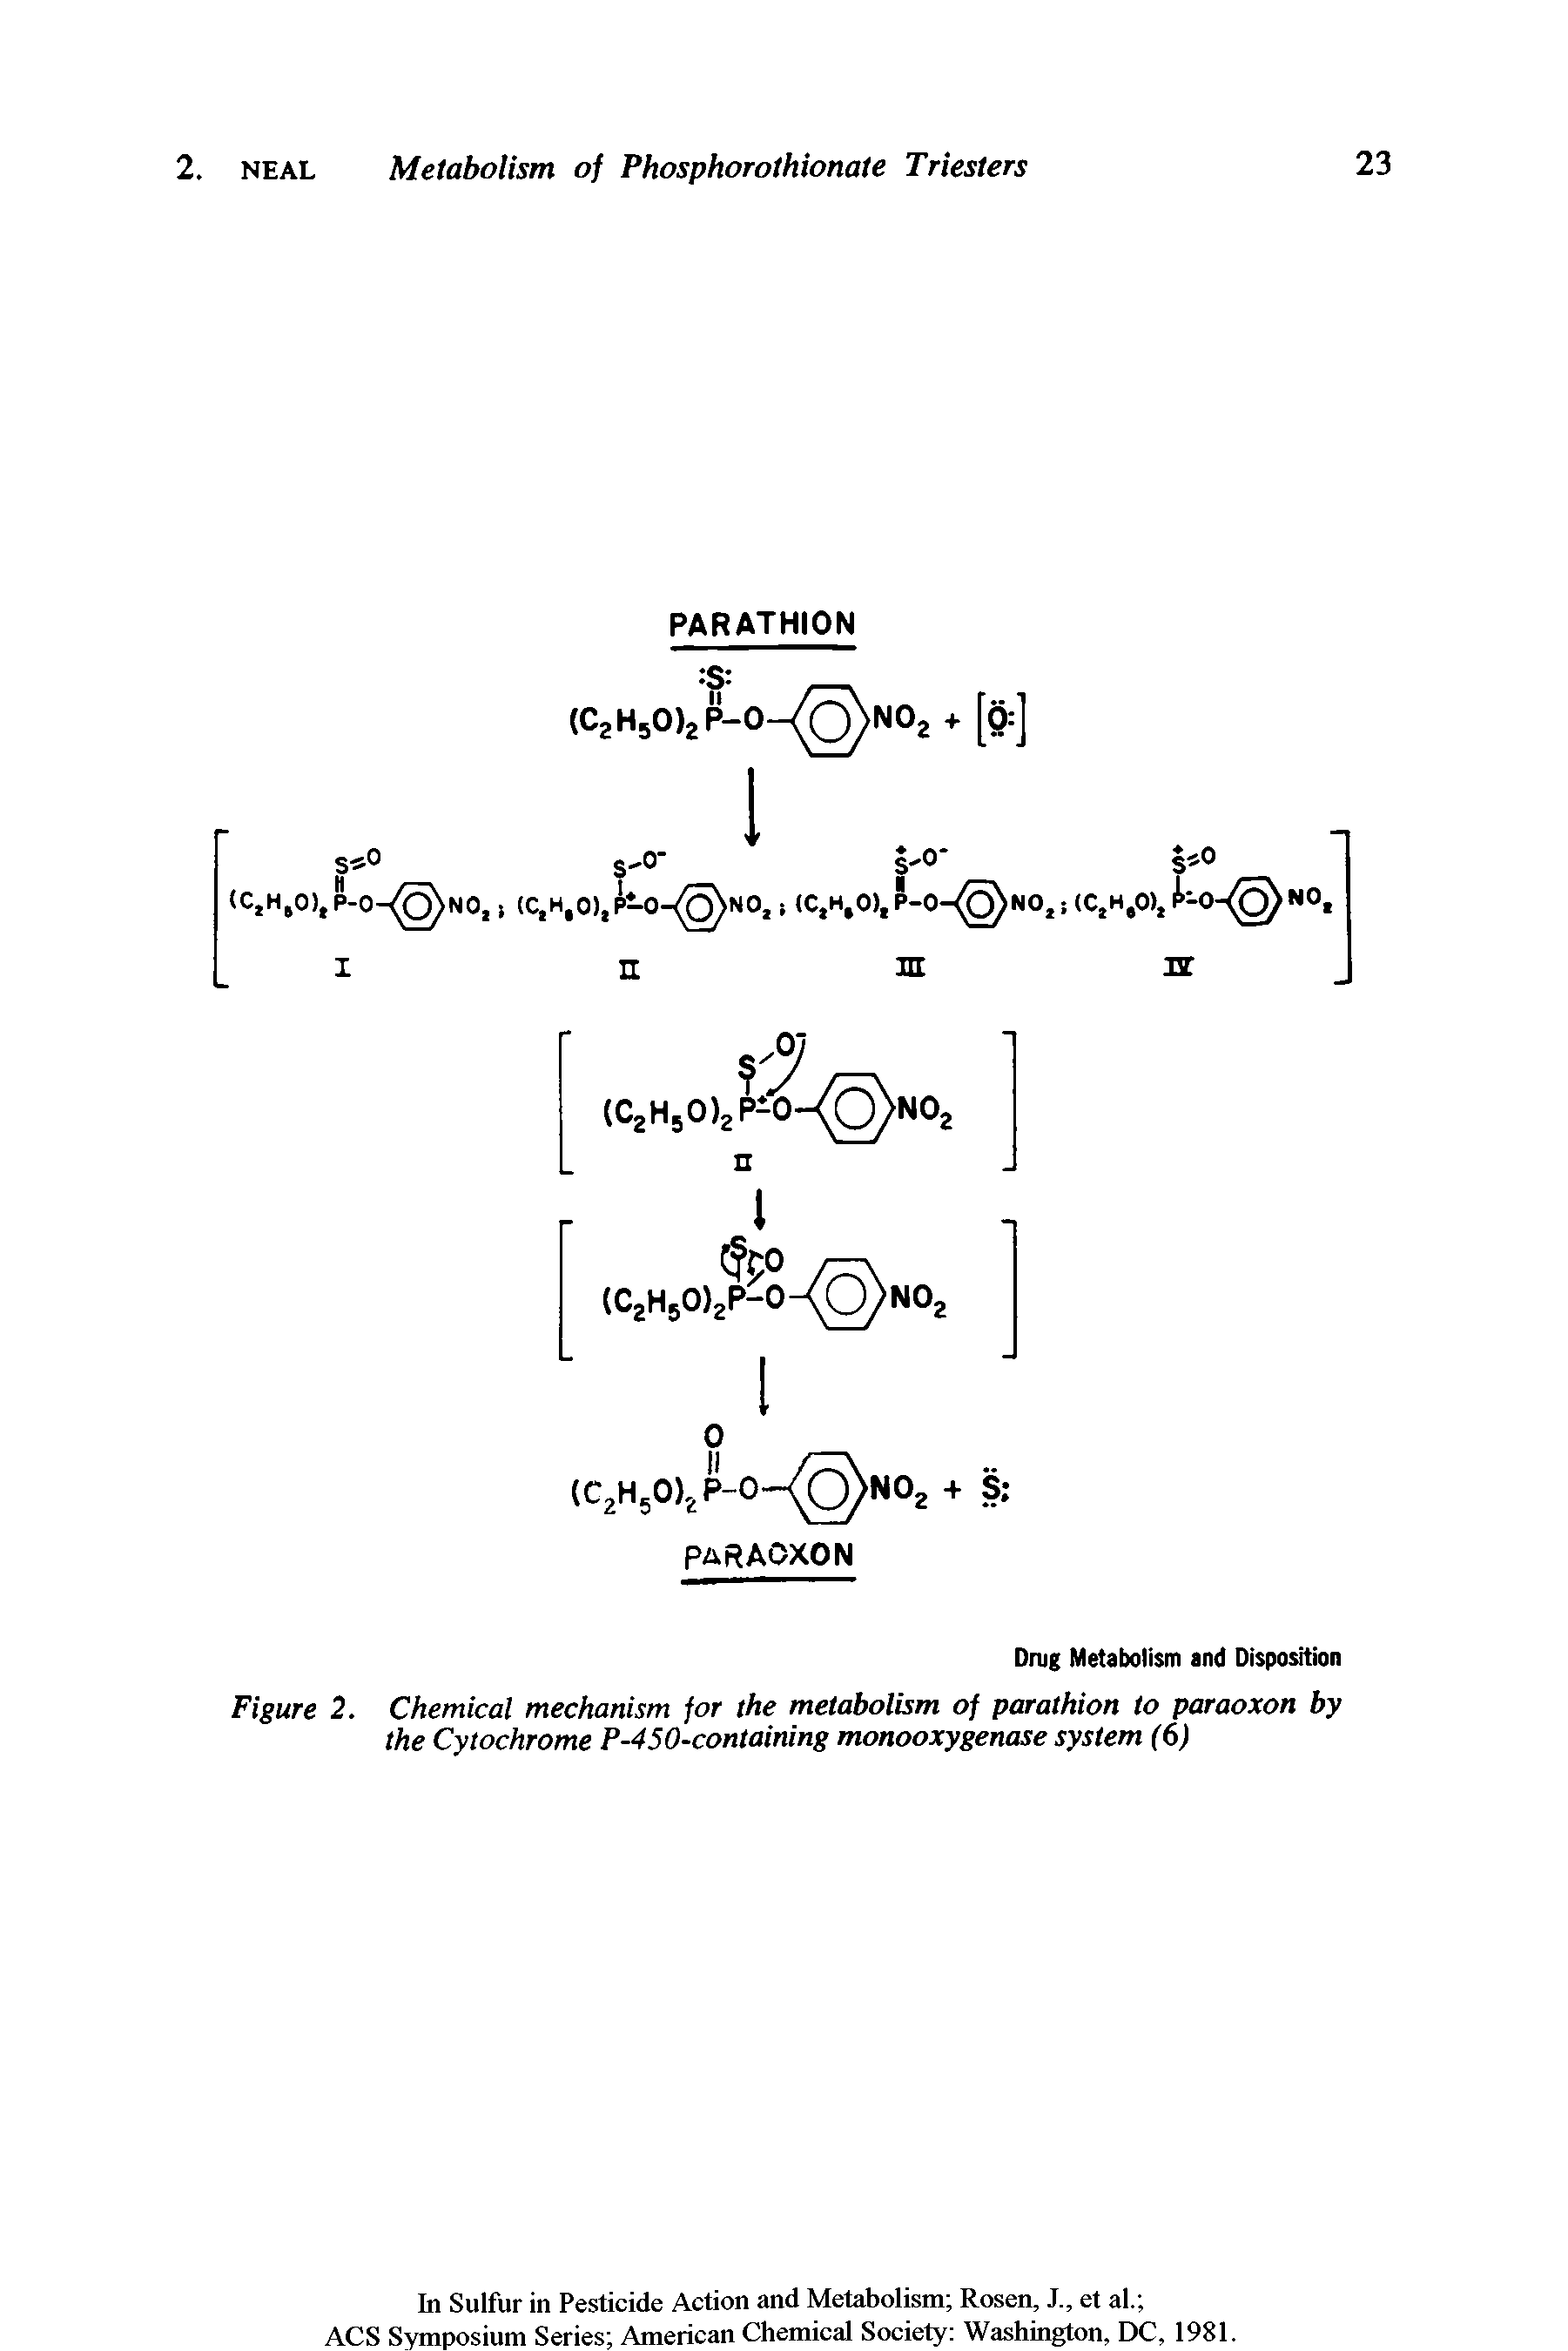 Figure 2. Chemical mechanism for the metabolism of parathion to paraoxon by the Cytochrome P-450-containing monooxygenase system (6)...